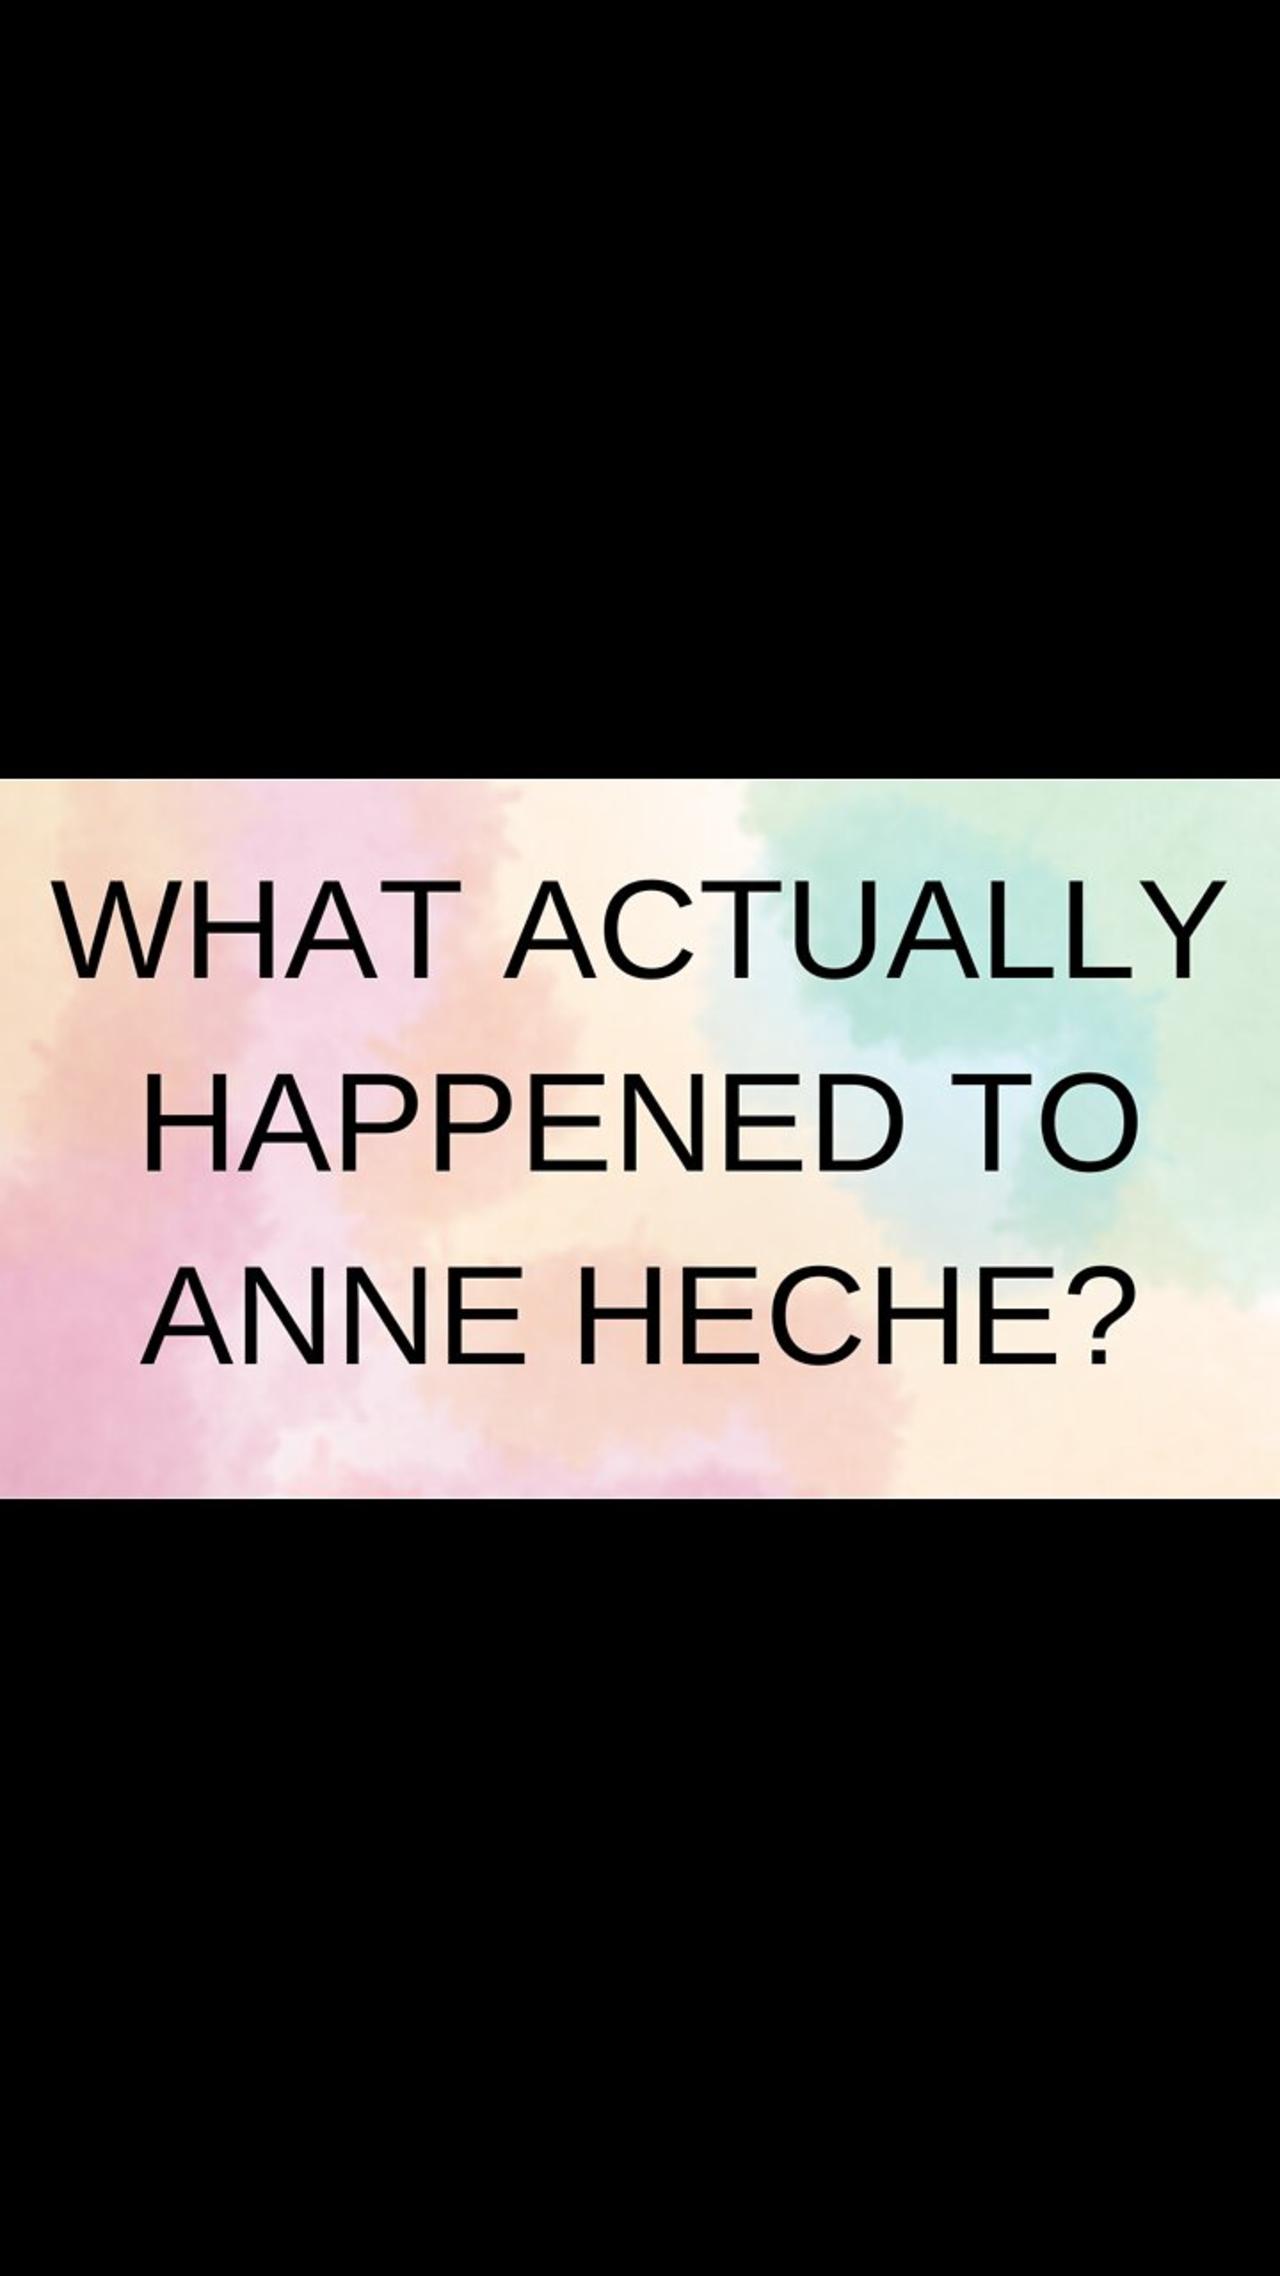 What Really Happened to Anne Heche?